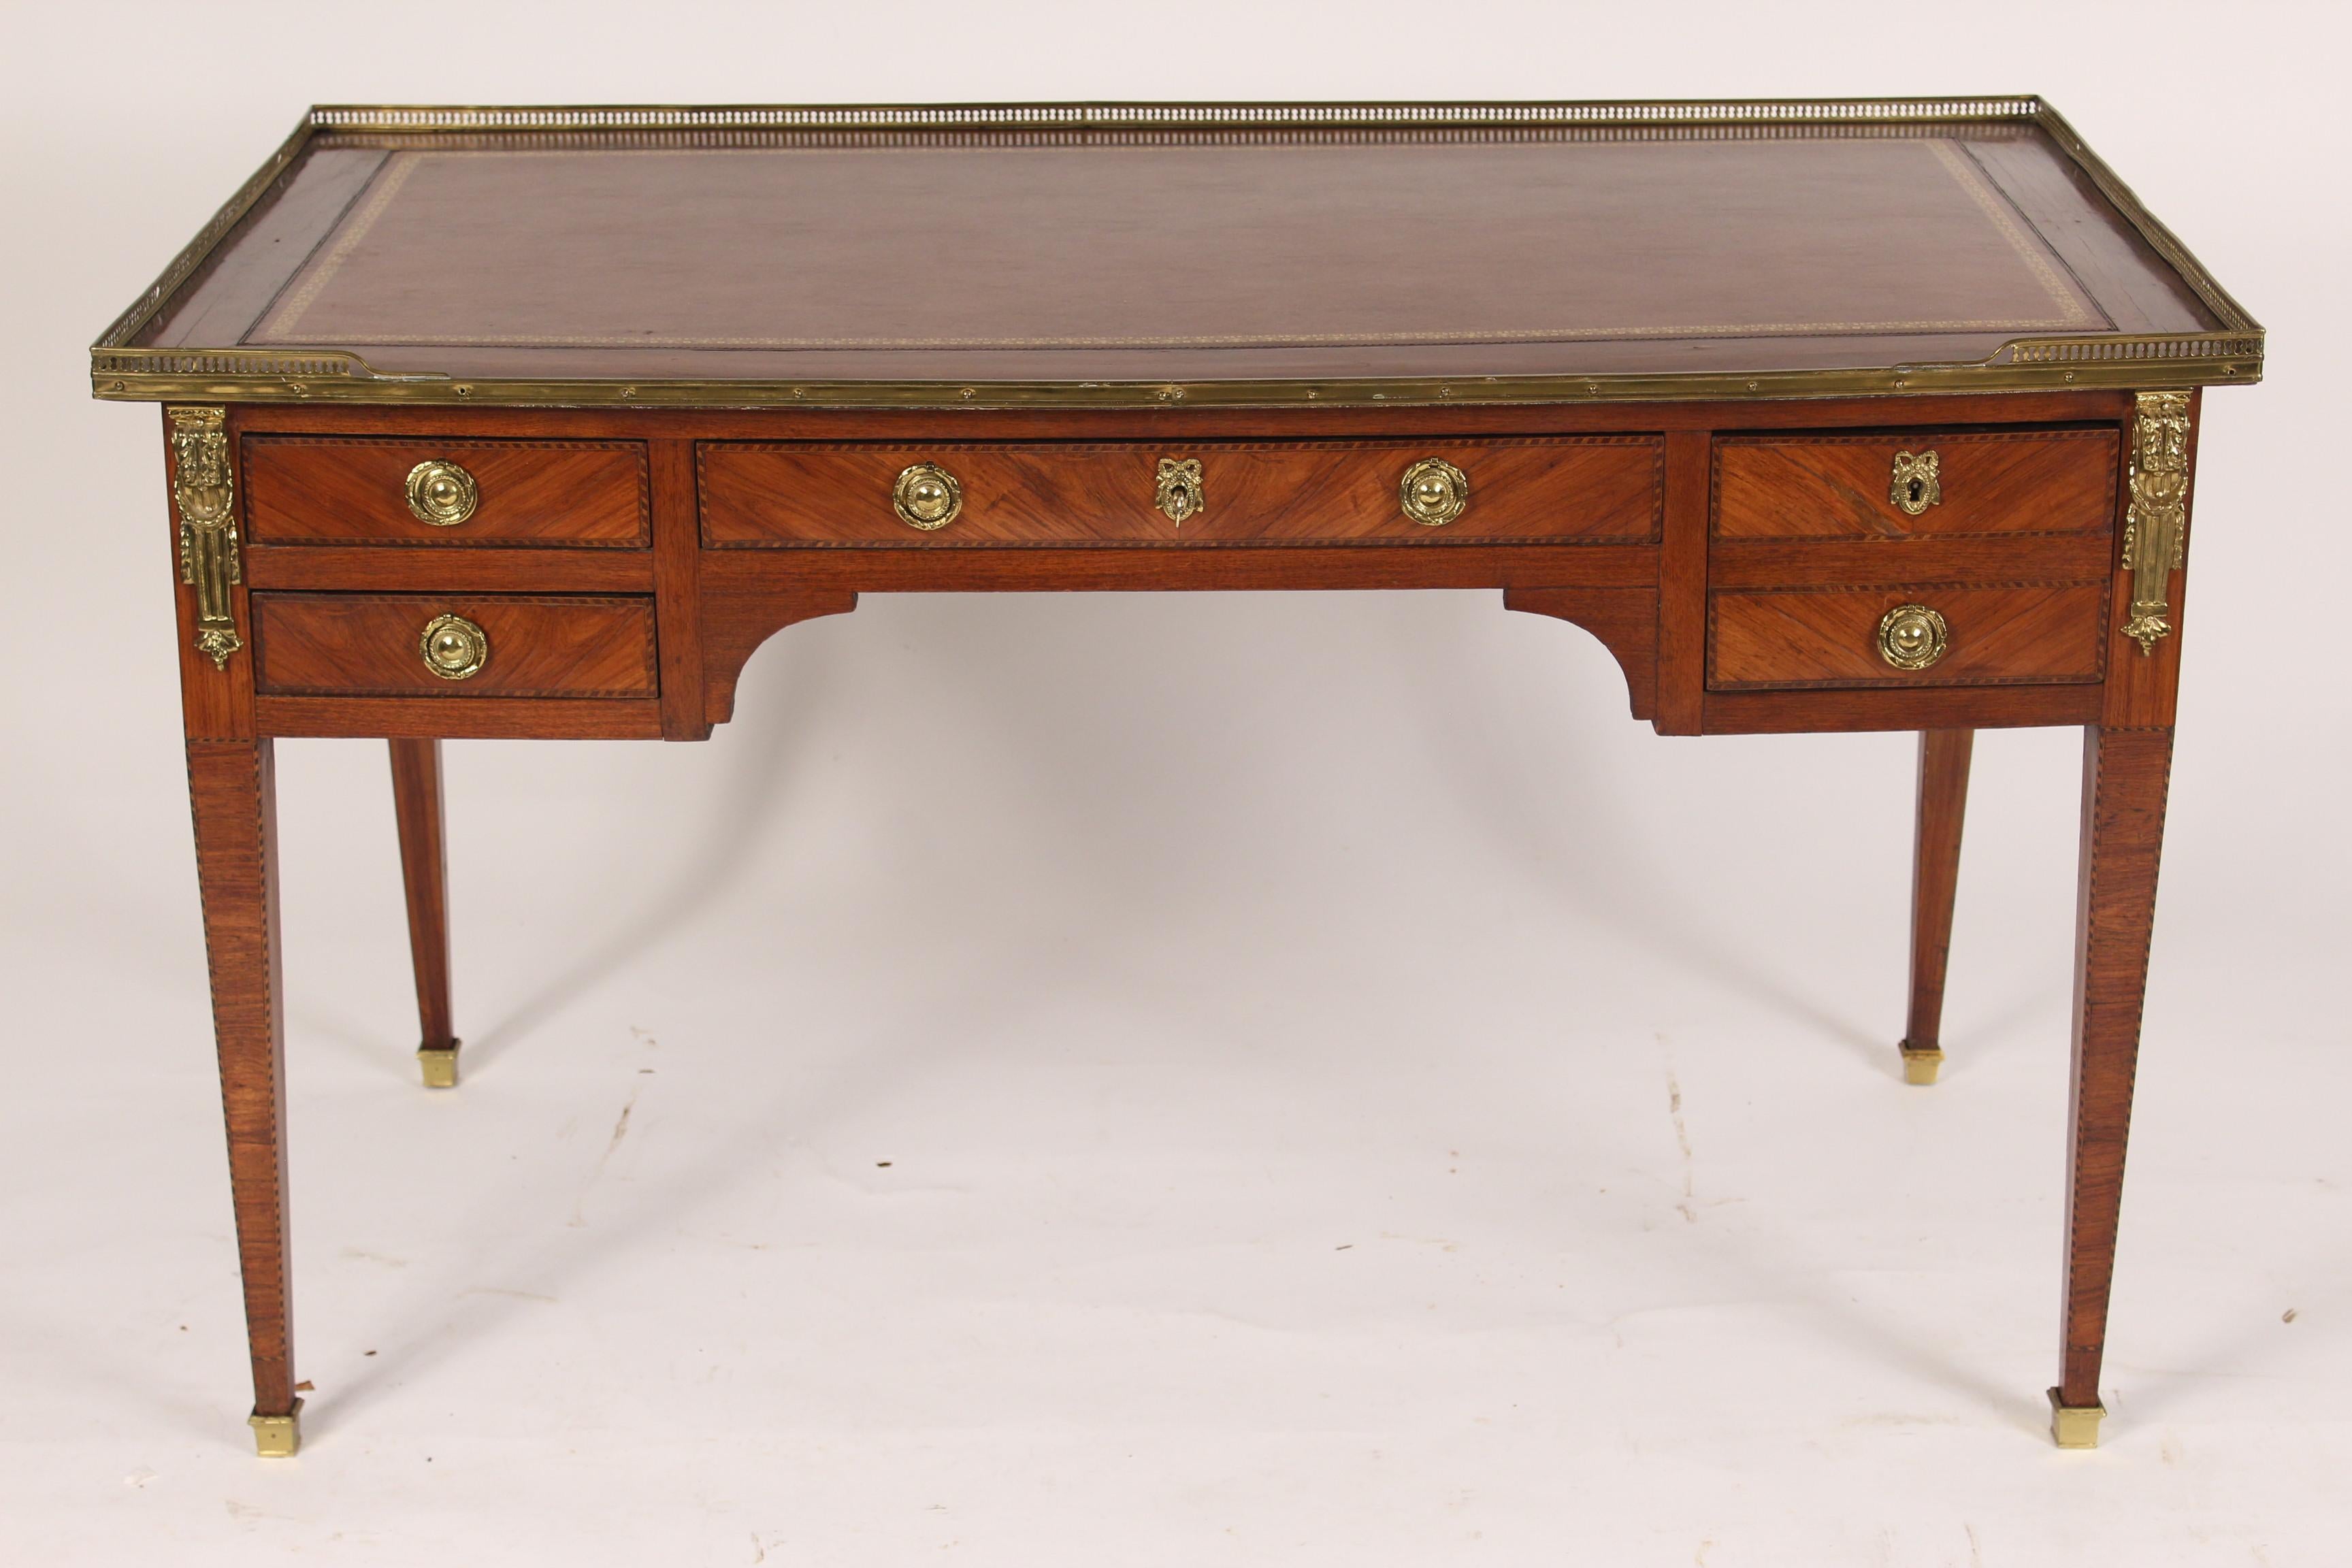 Antique Louis XVI style tulip wood desk with a tooled leather top and a brass gallery, late 19th century.